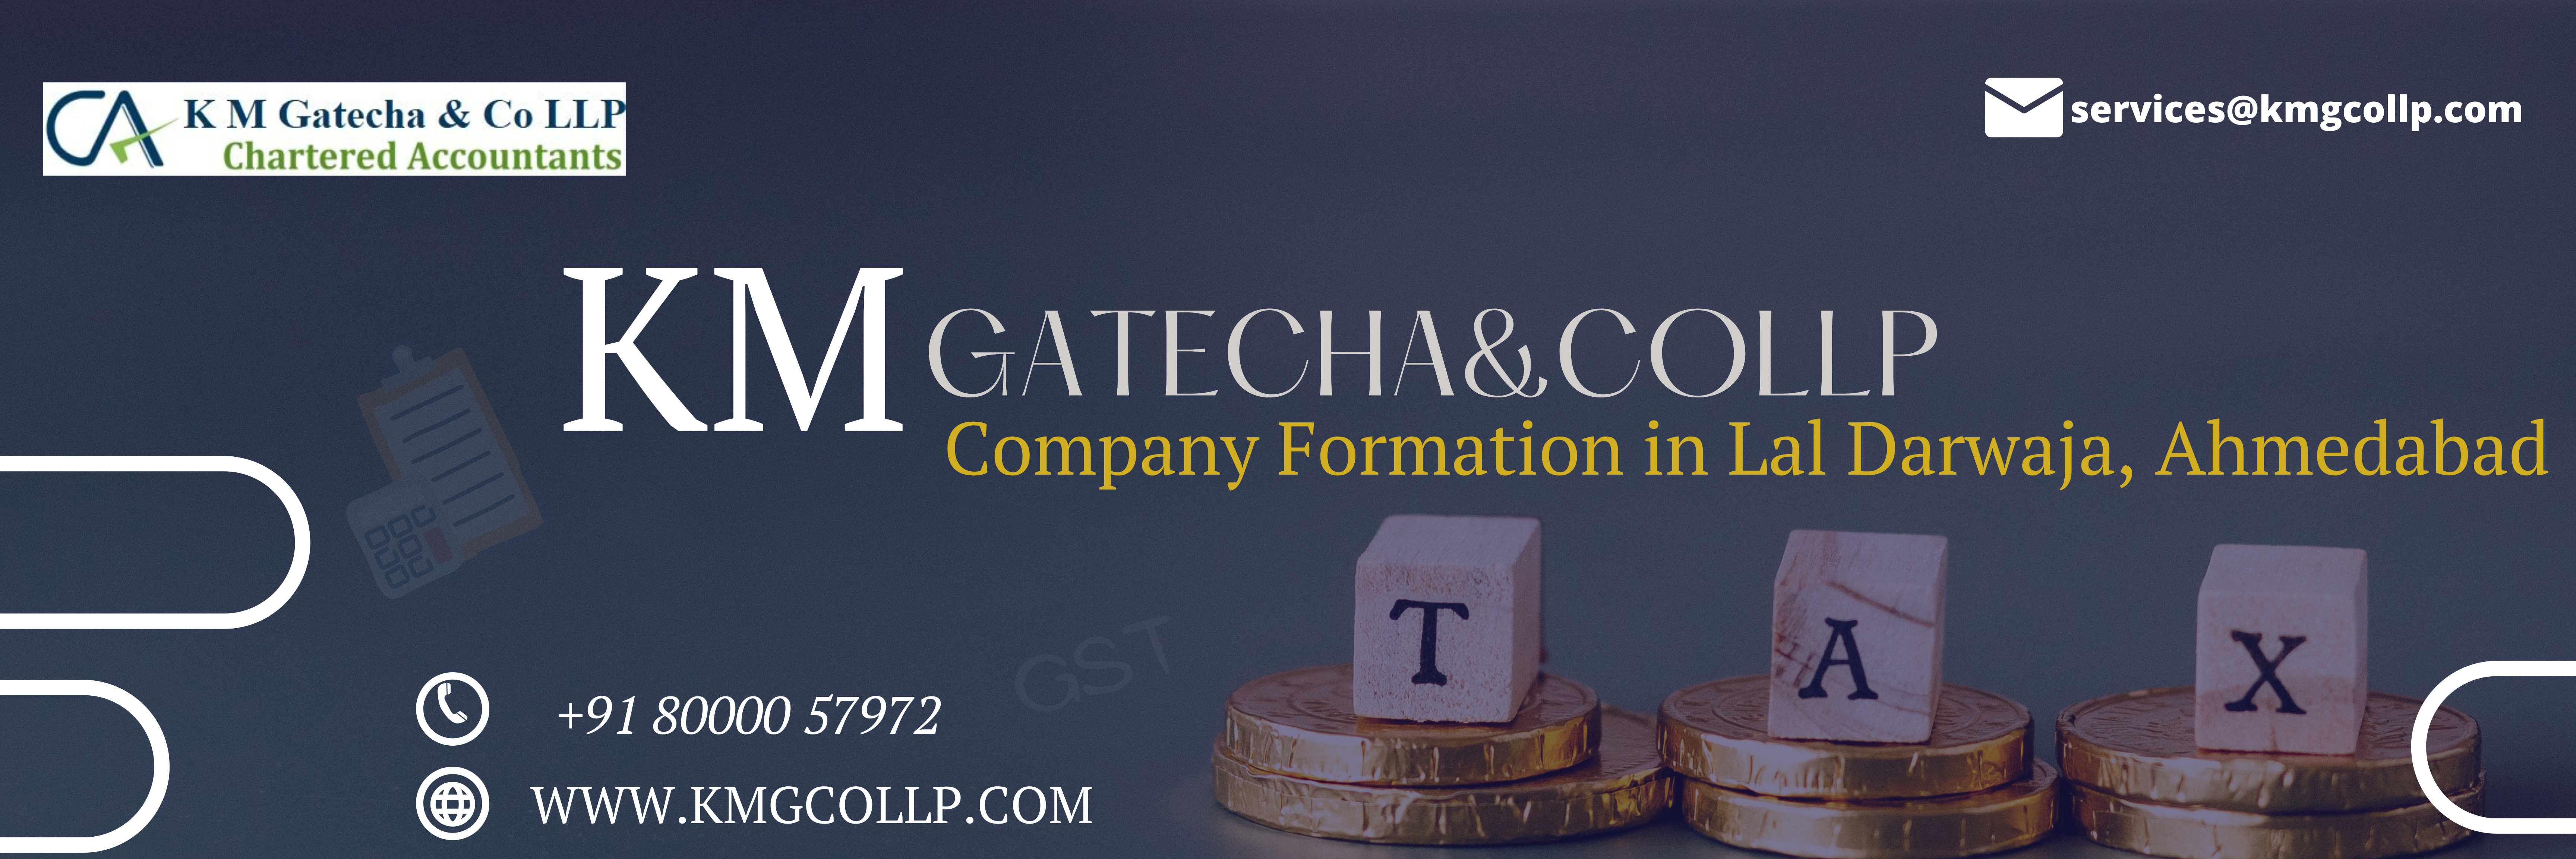 Company Formation in Lal Darwaja